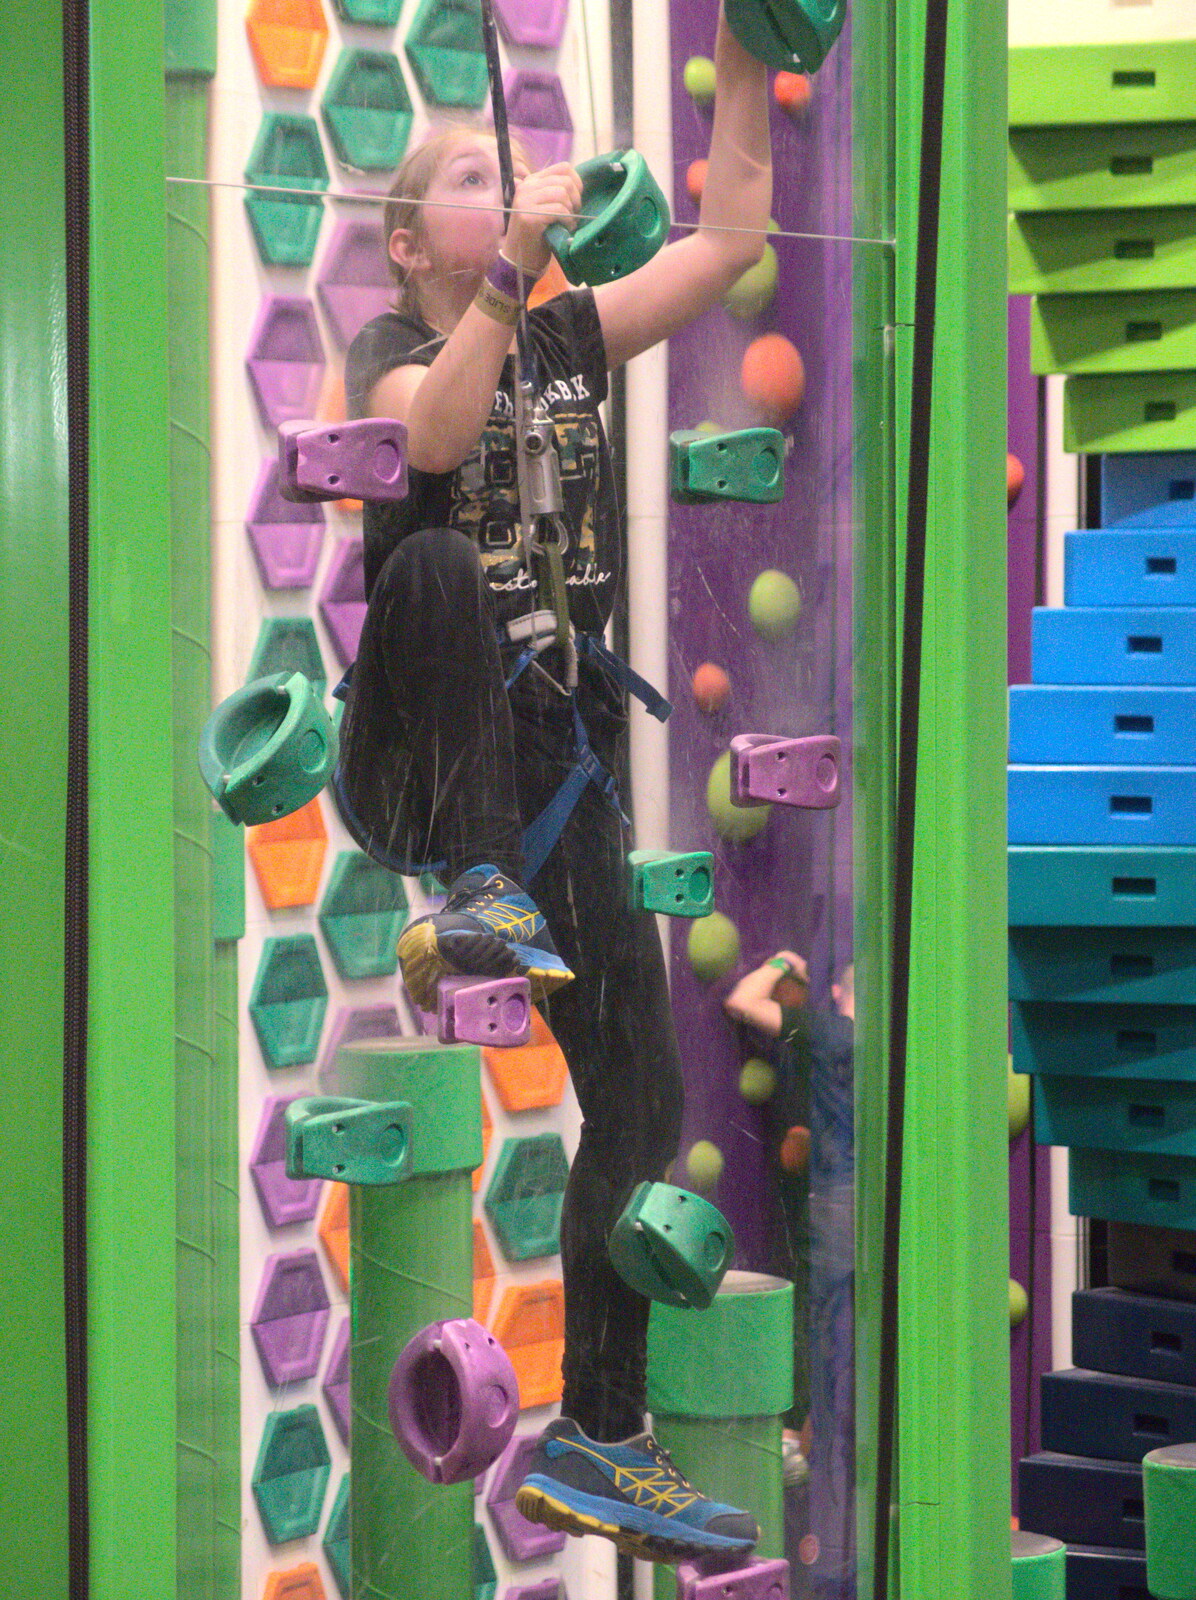 Sophie goes up again from Clip and Climb, The Havens, Ipswich - 15th February 2020